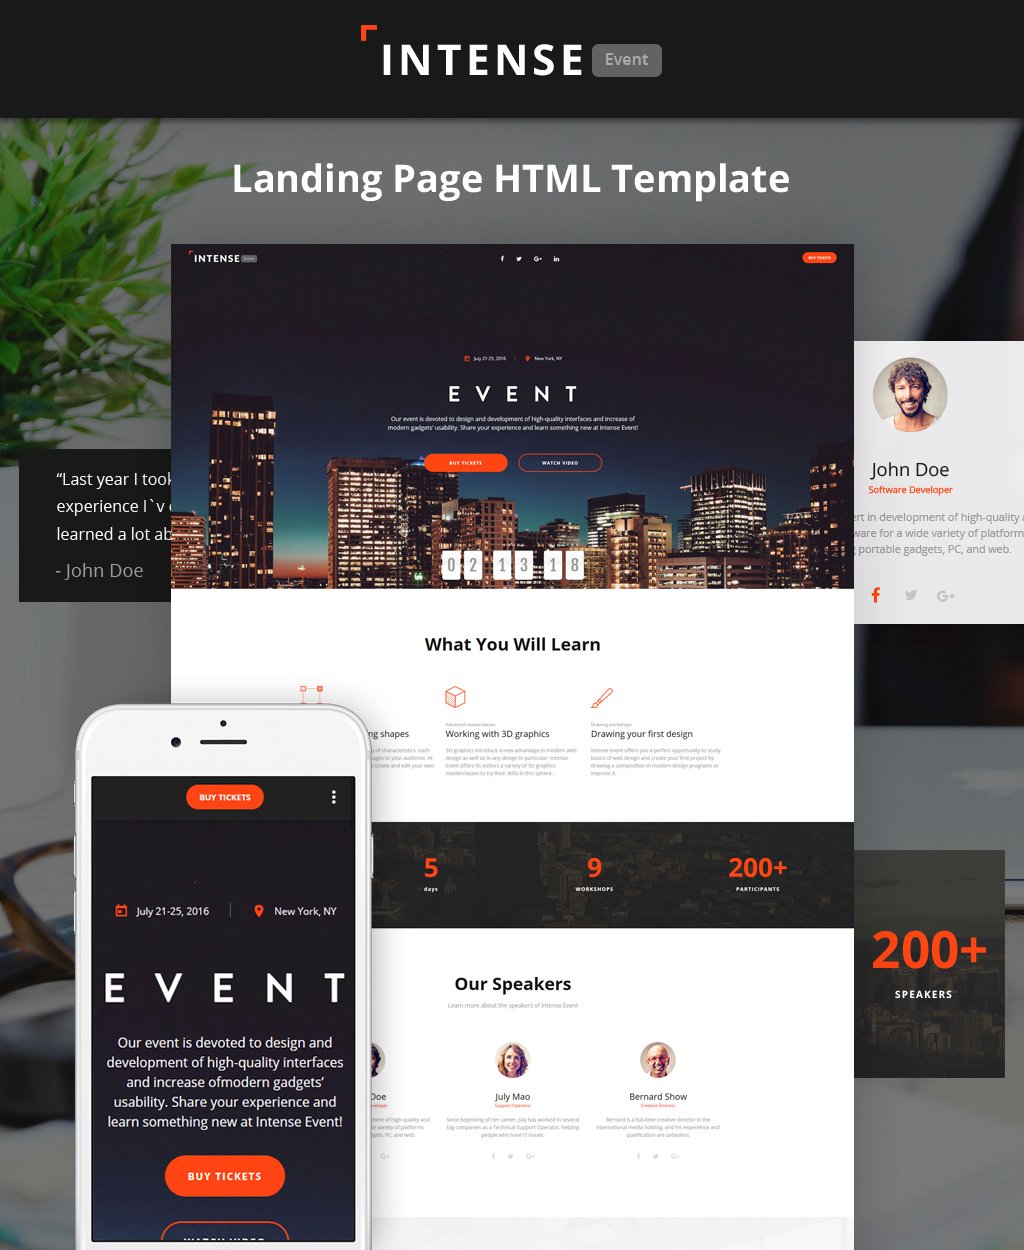 Intense - Event Planner HTML5 Landing Page Template